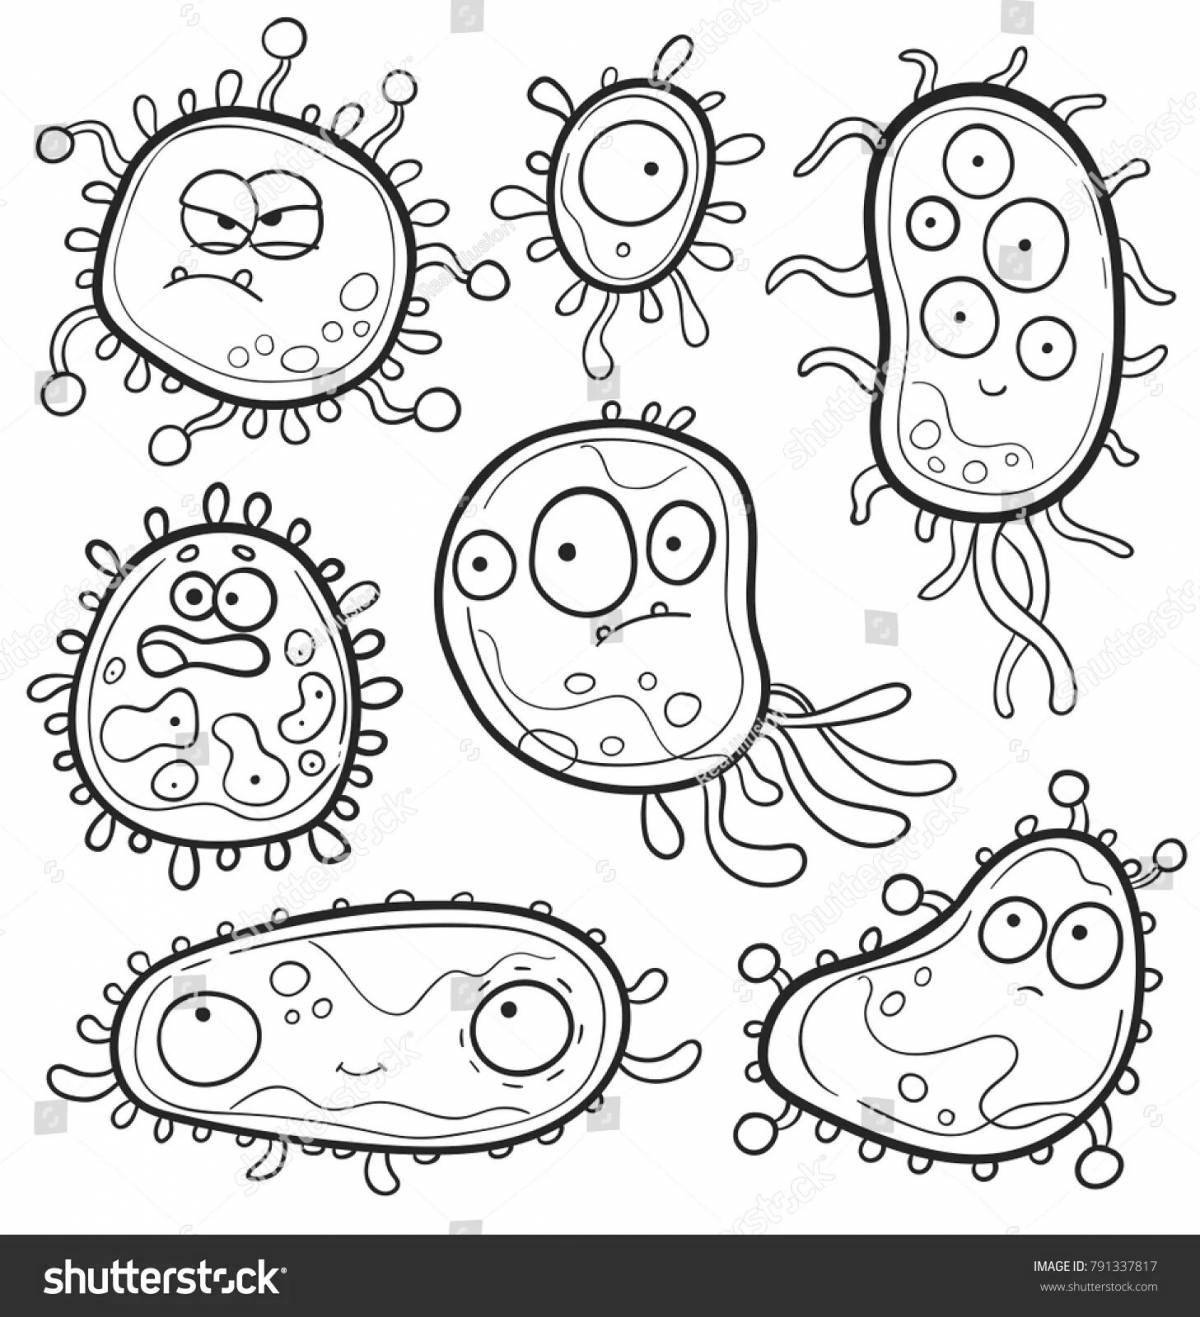 Adorable microbes and bacteria coloring book